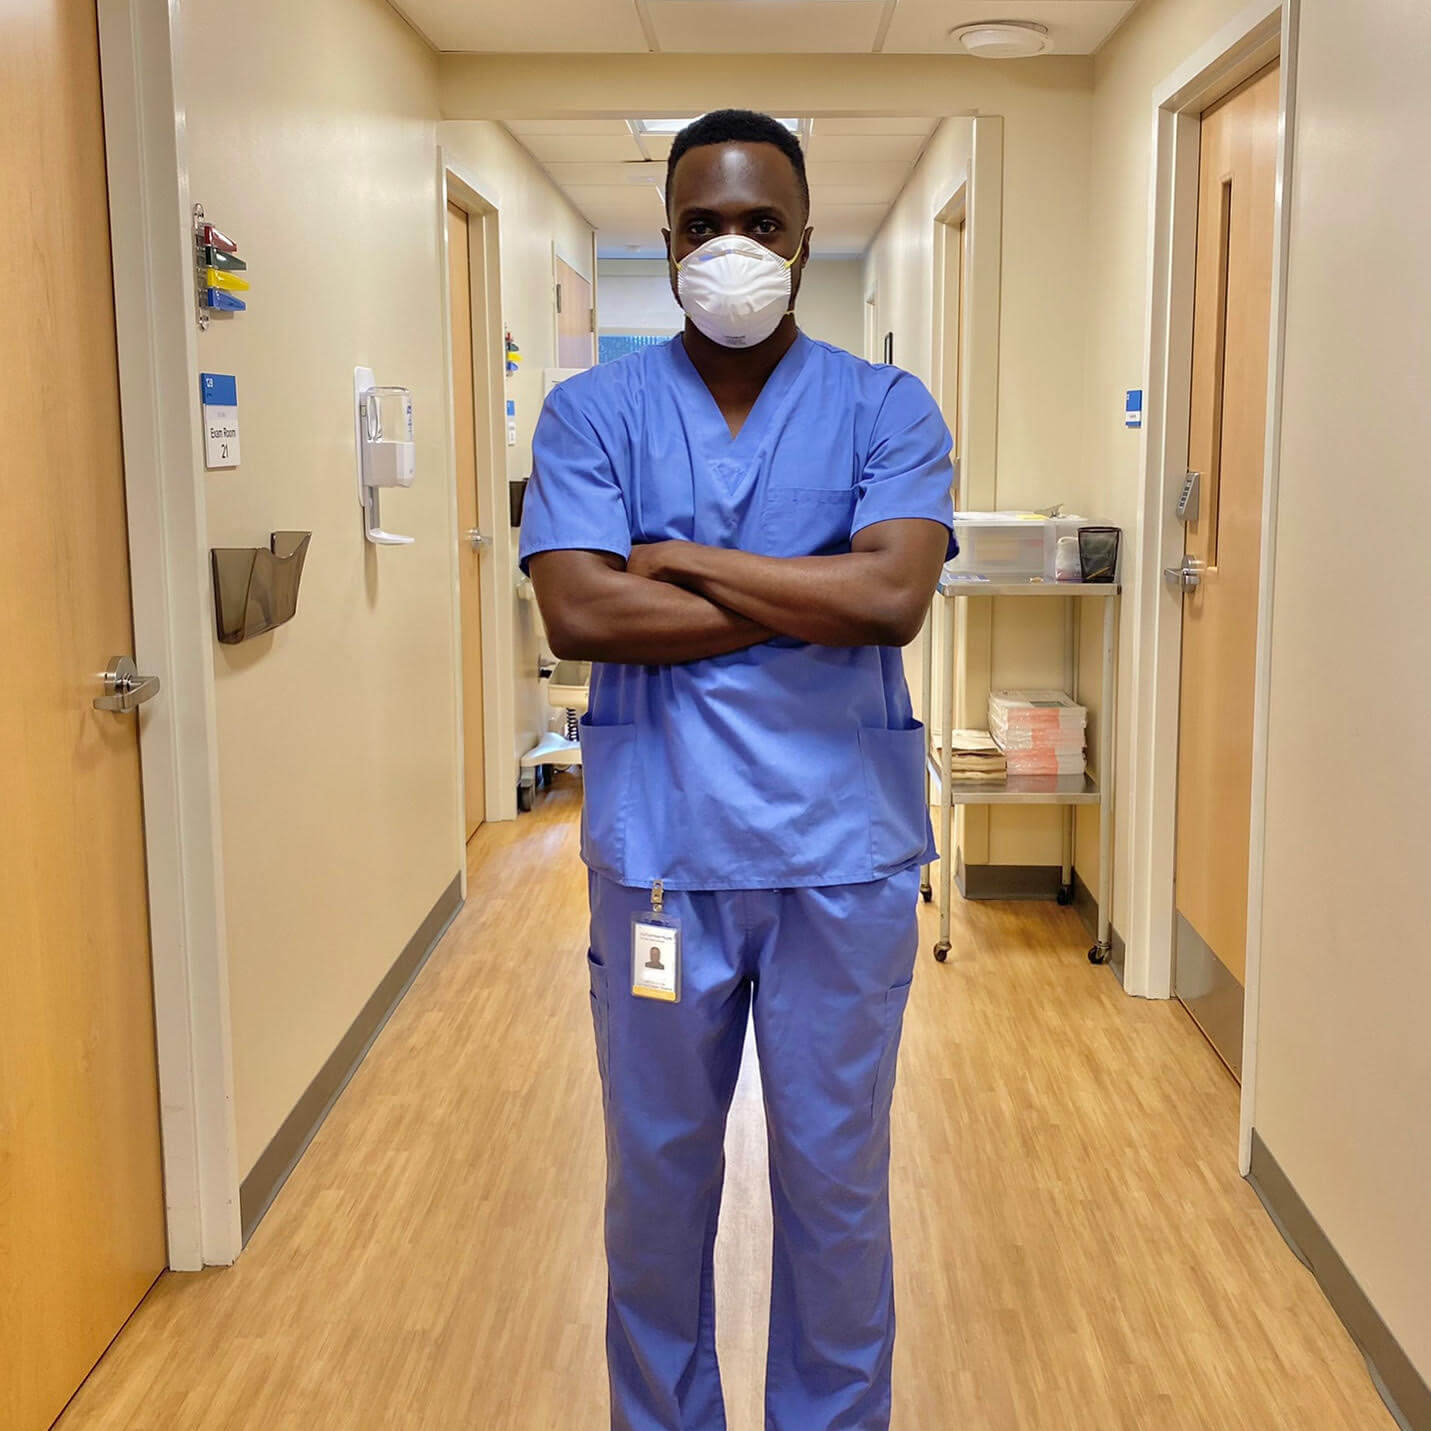 This Nigerian student at Yale wants to provide free, quality burn care for kids